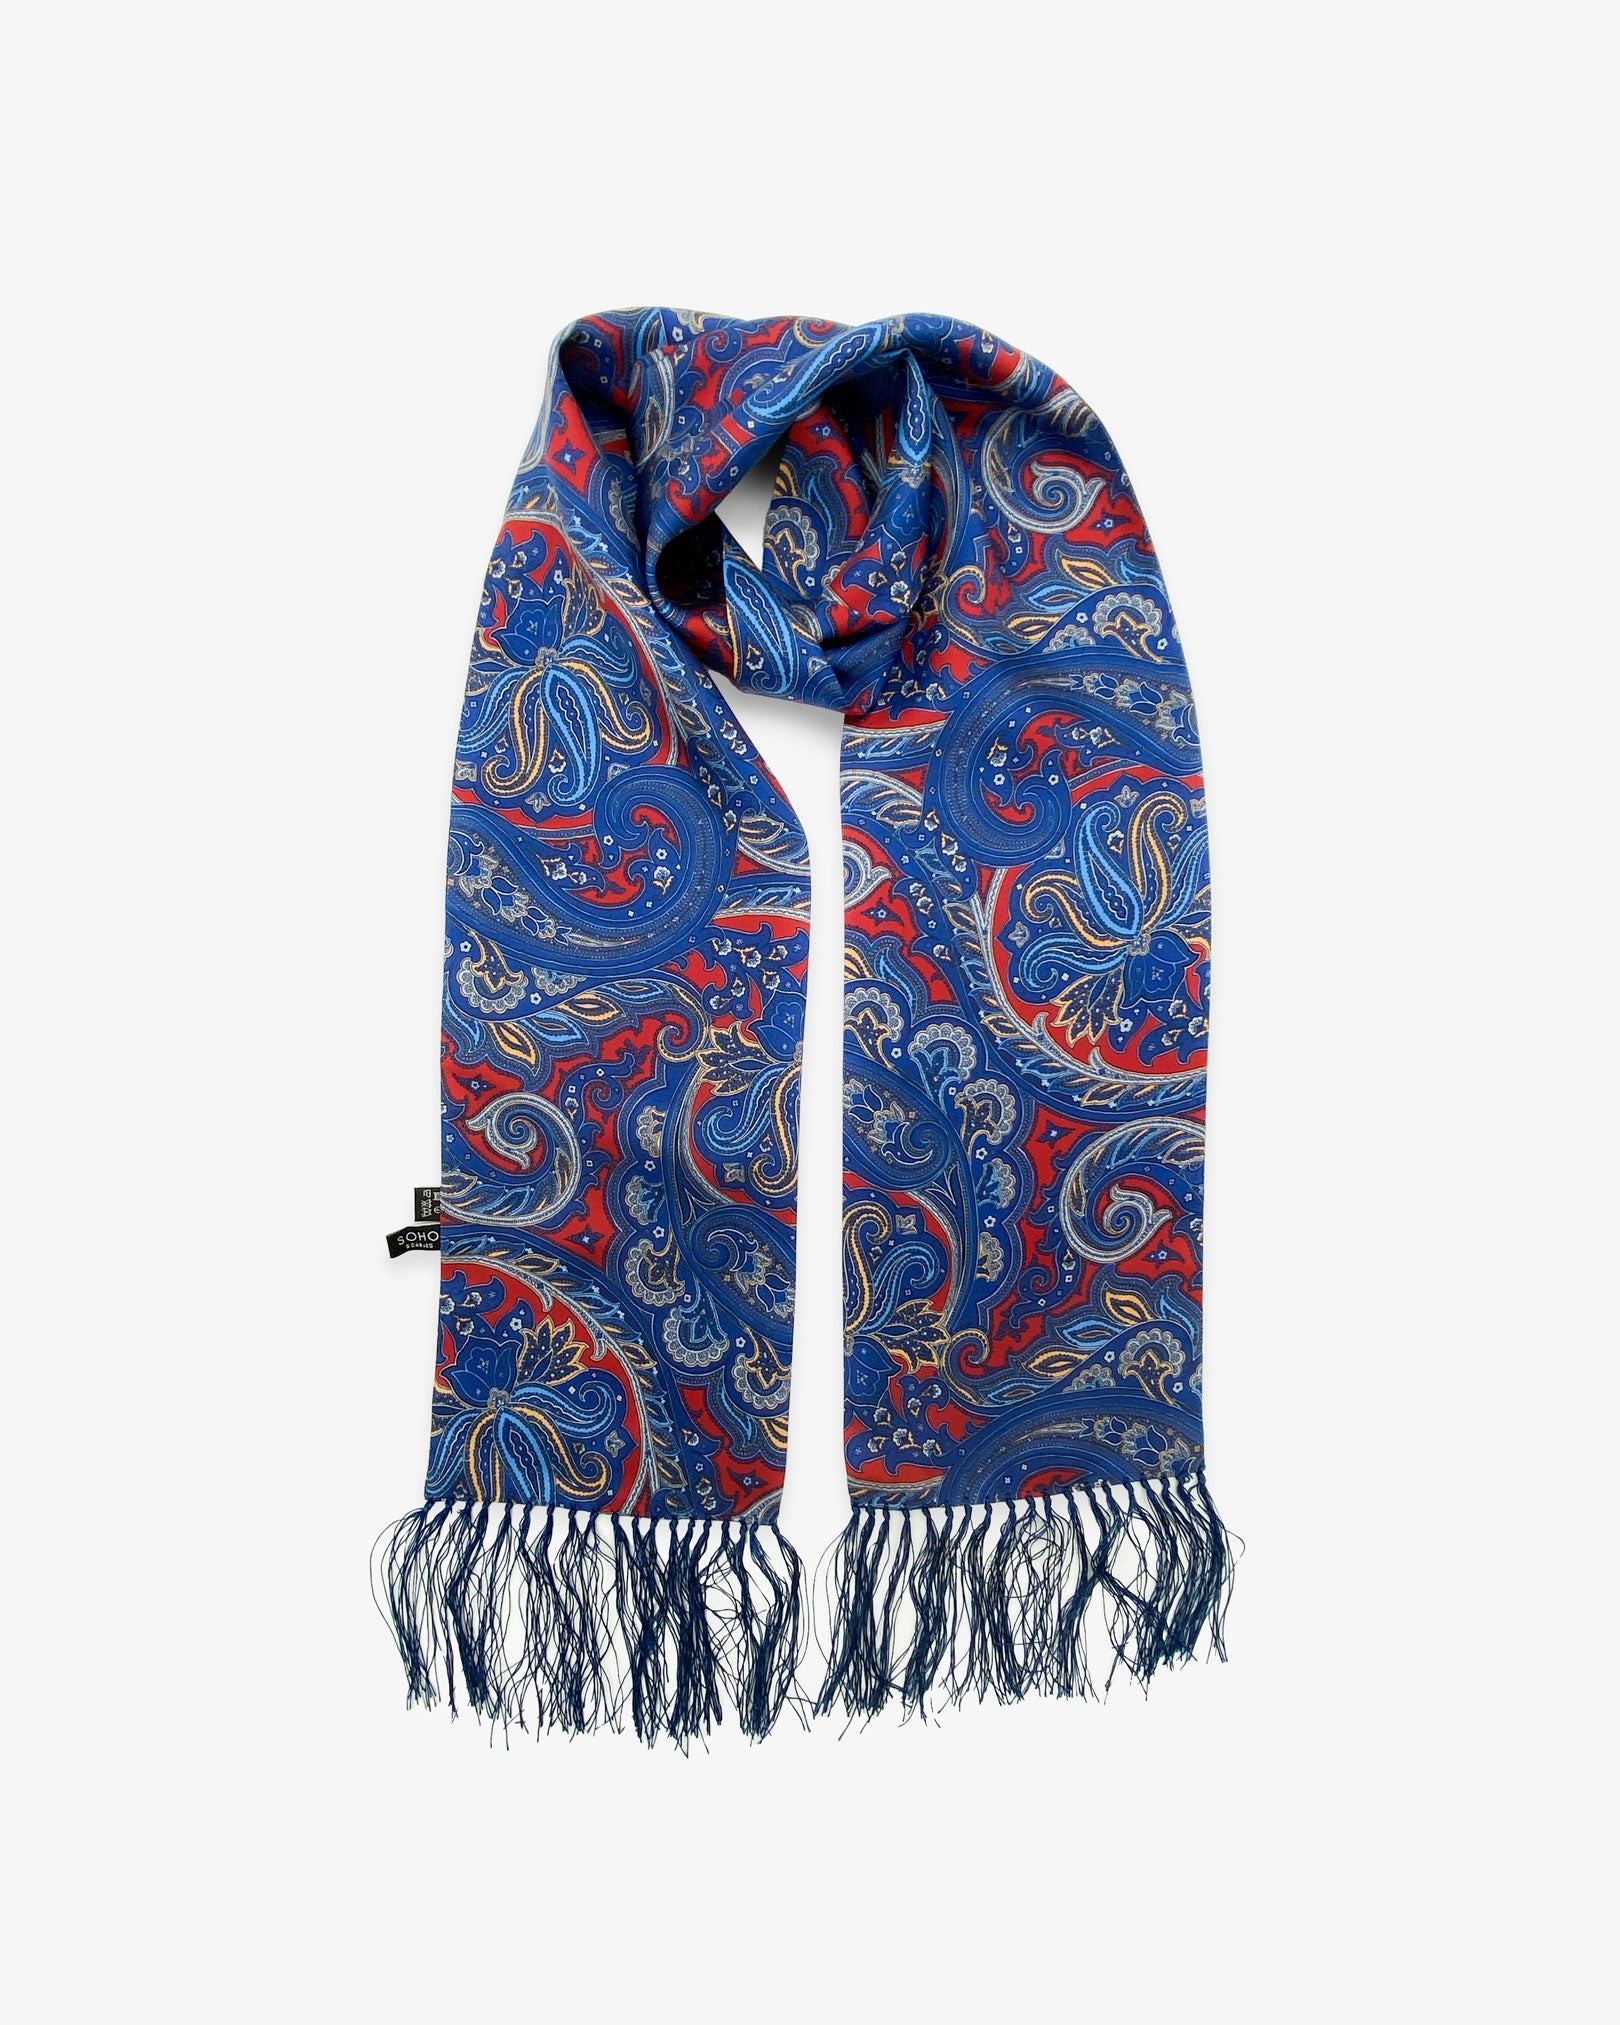 The Oxford pure silk aviator paisley scarf looped in middle with both ends parallel showing the navy-blue paisley patterns on a deep-red ground with matching 3-inch fringe.